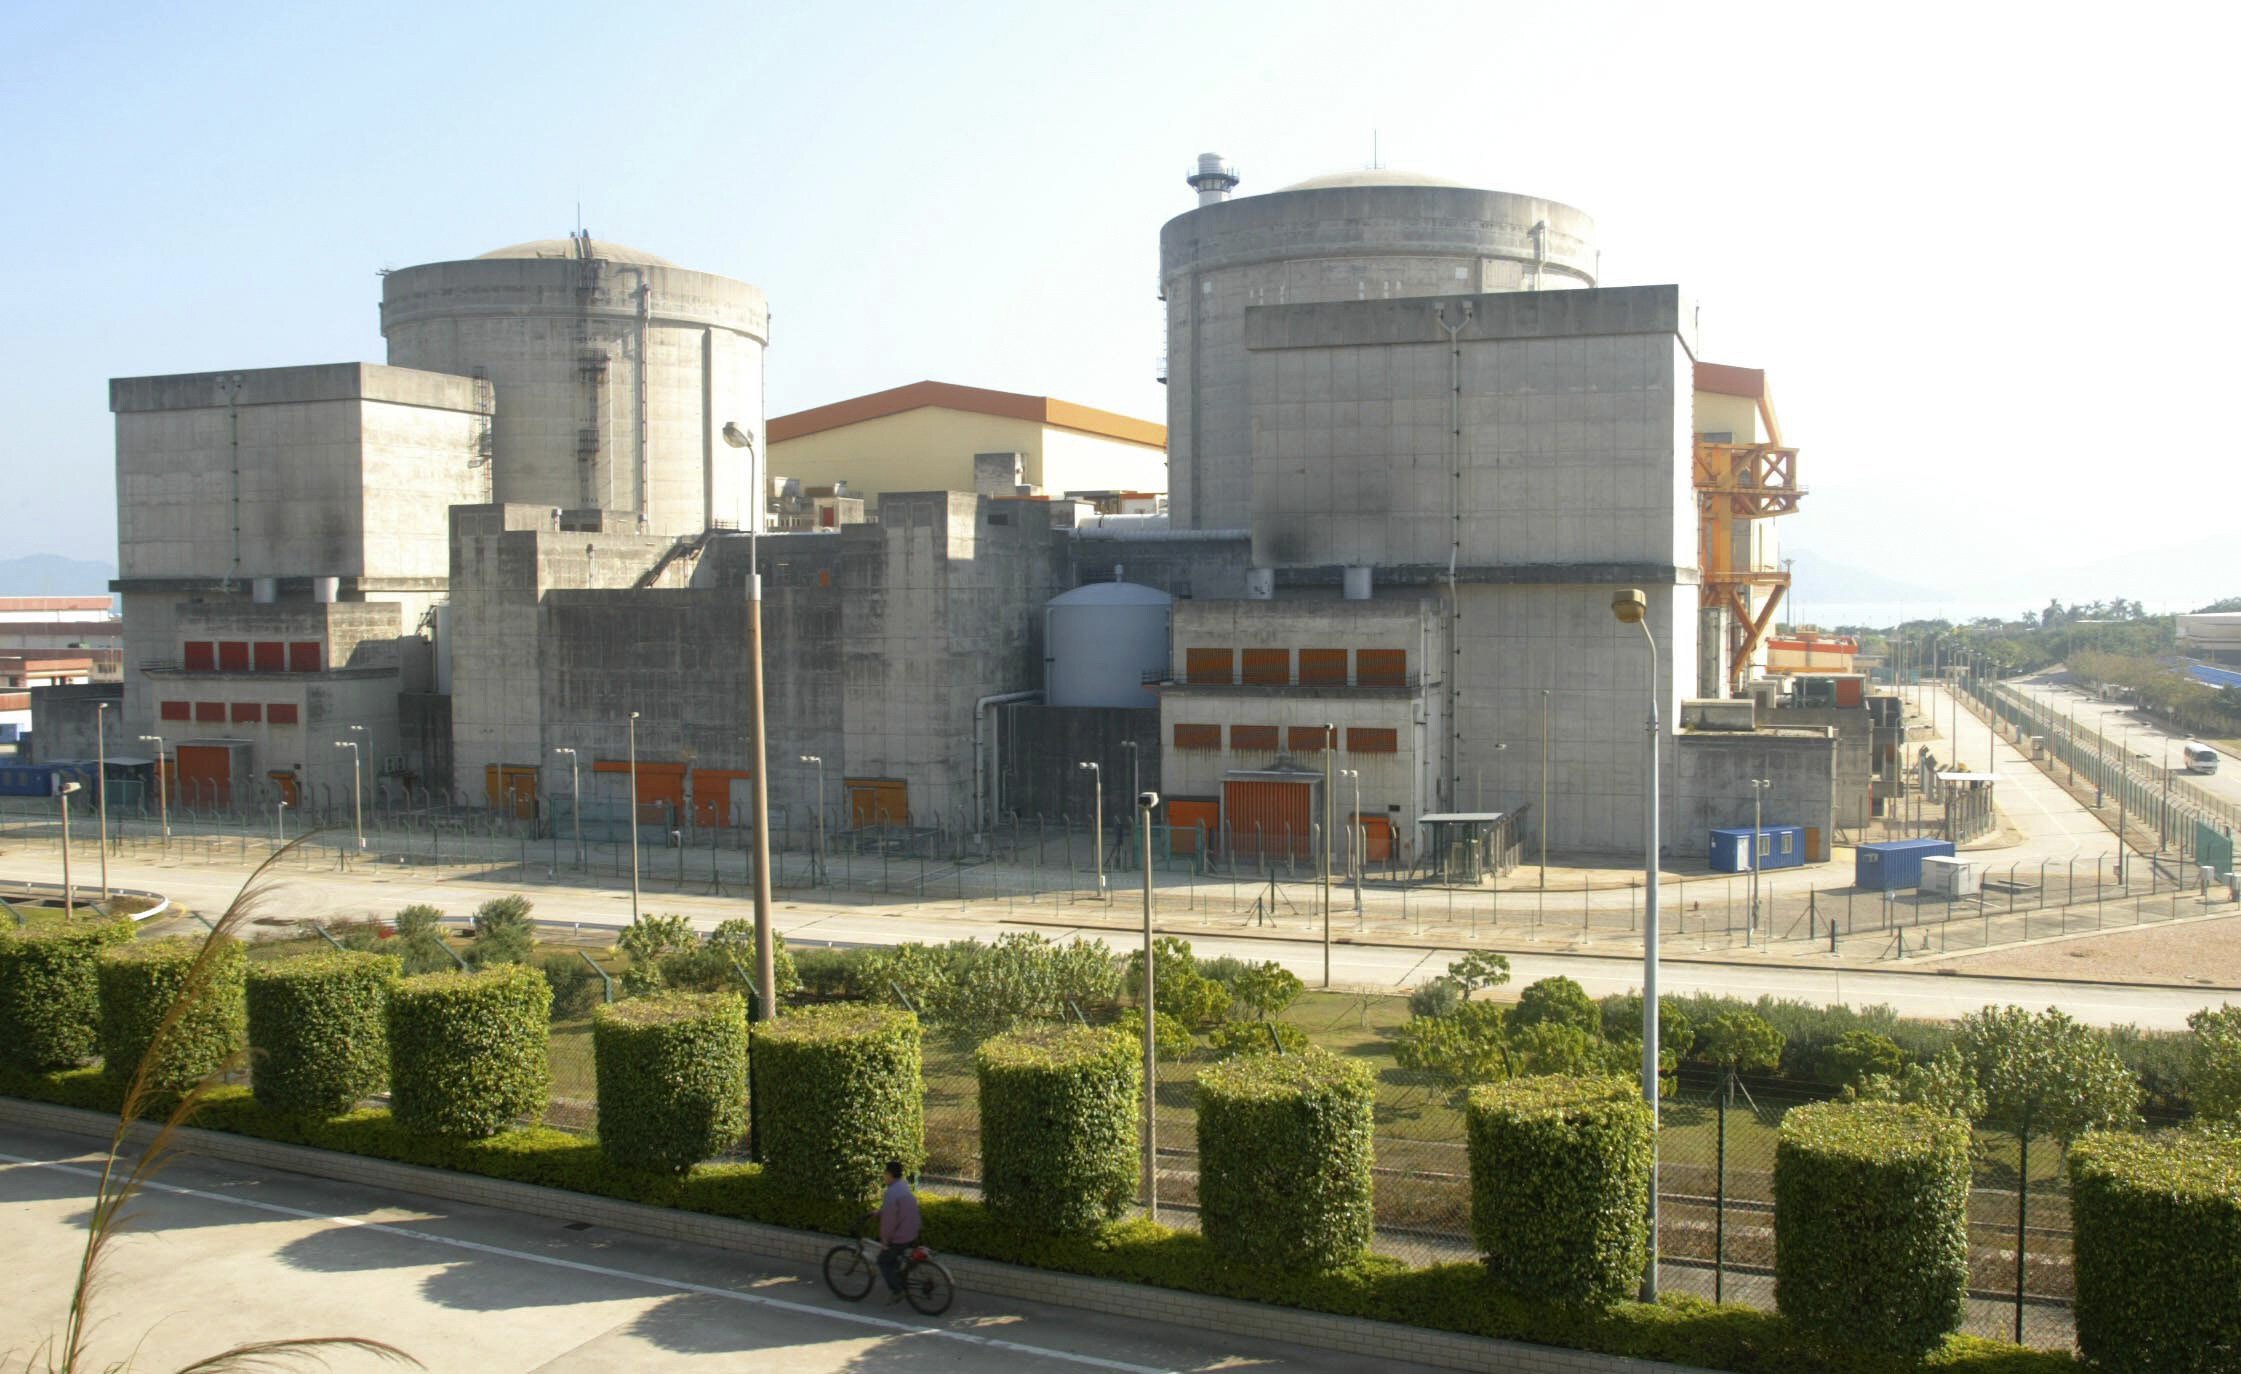 The Daya Bay nuclear power plant in Shenzhen. A recent report suggests increasing nuclear power imports could help Hong Kong accelerate its decarbonisation goals. Photo: AP